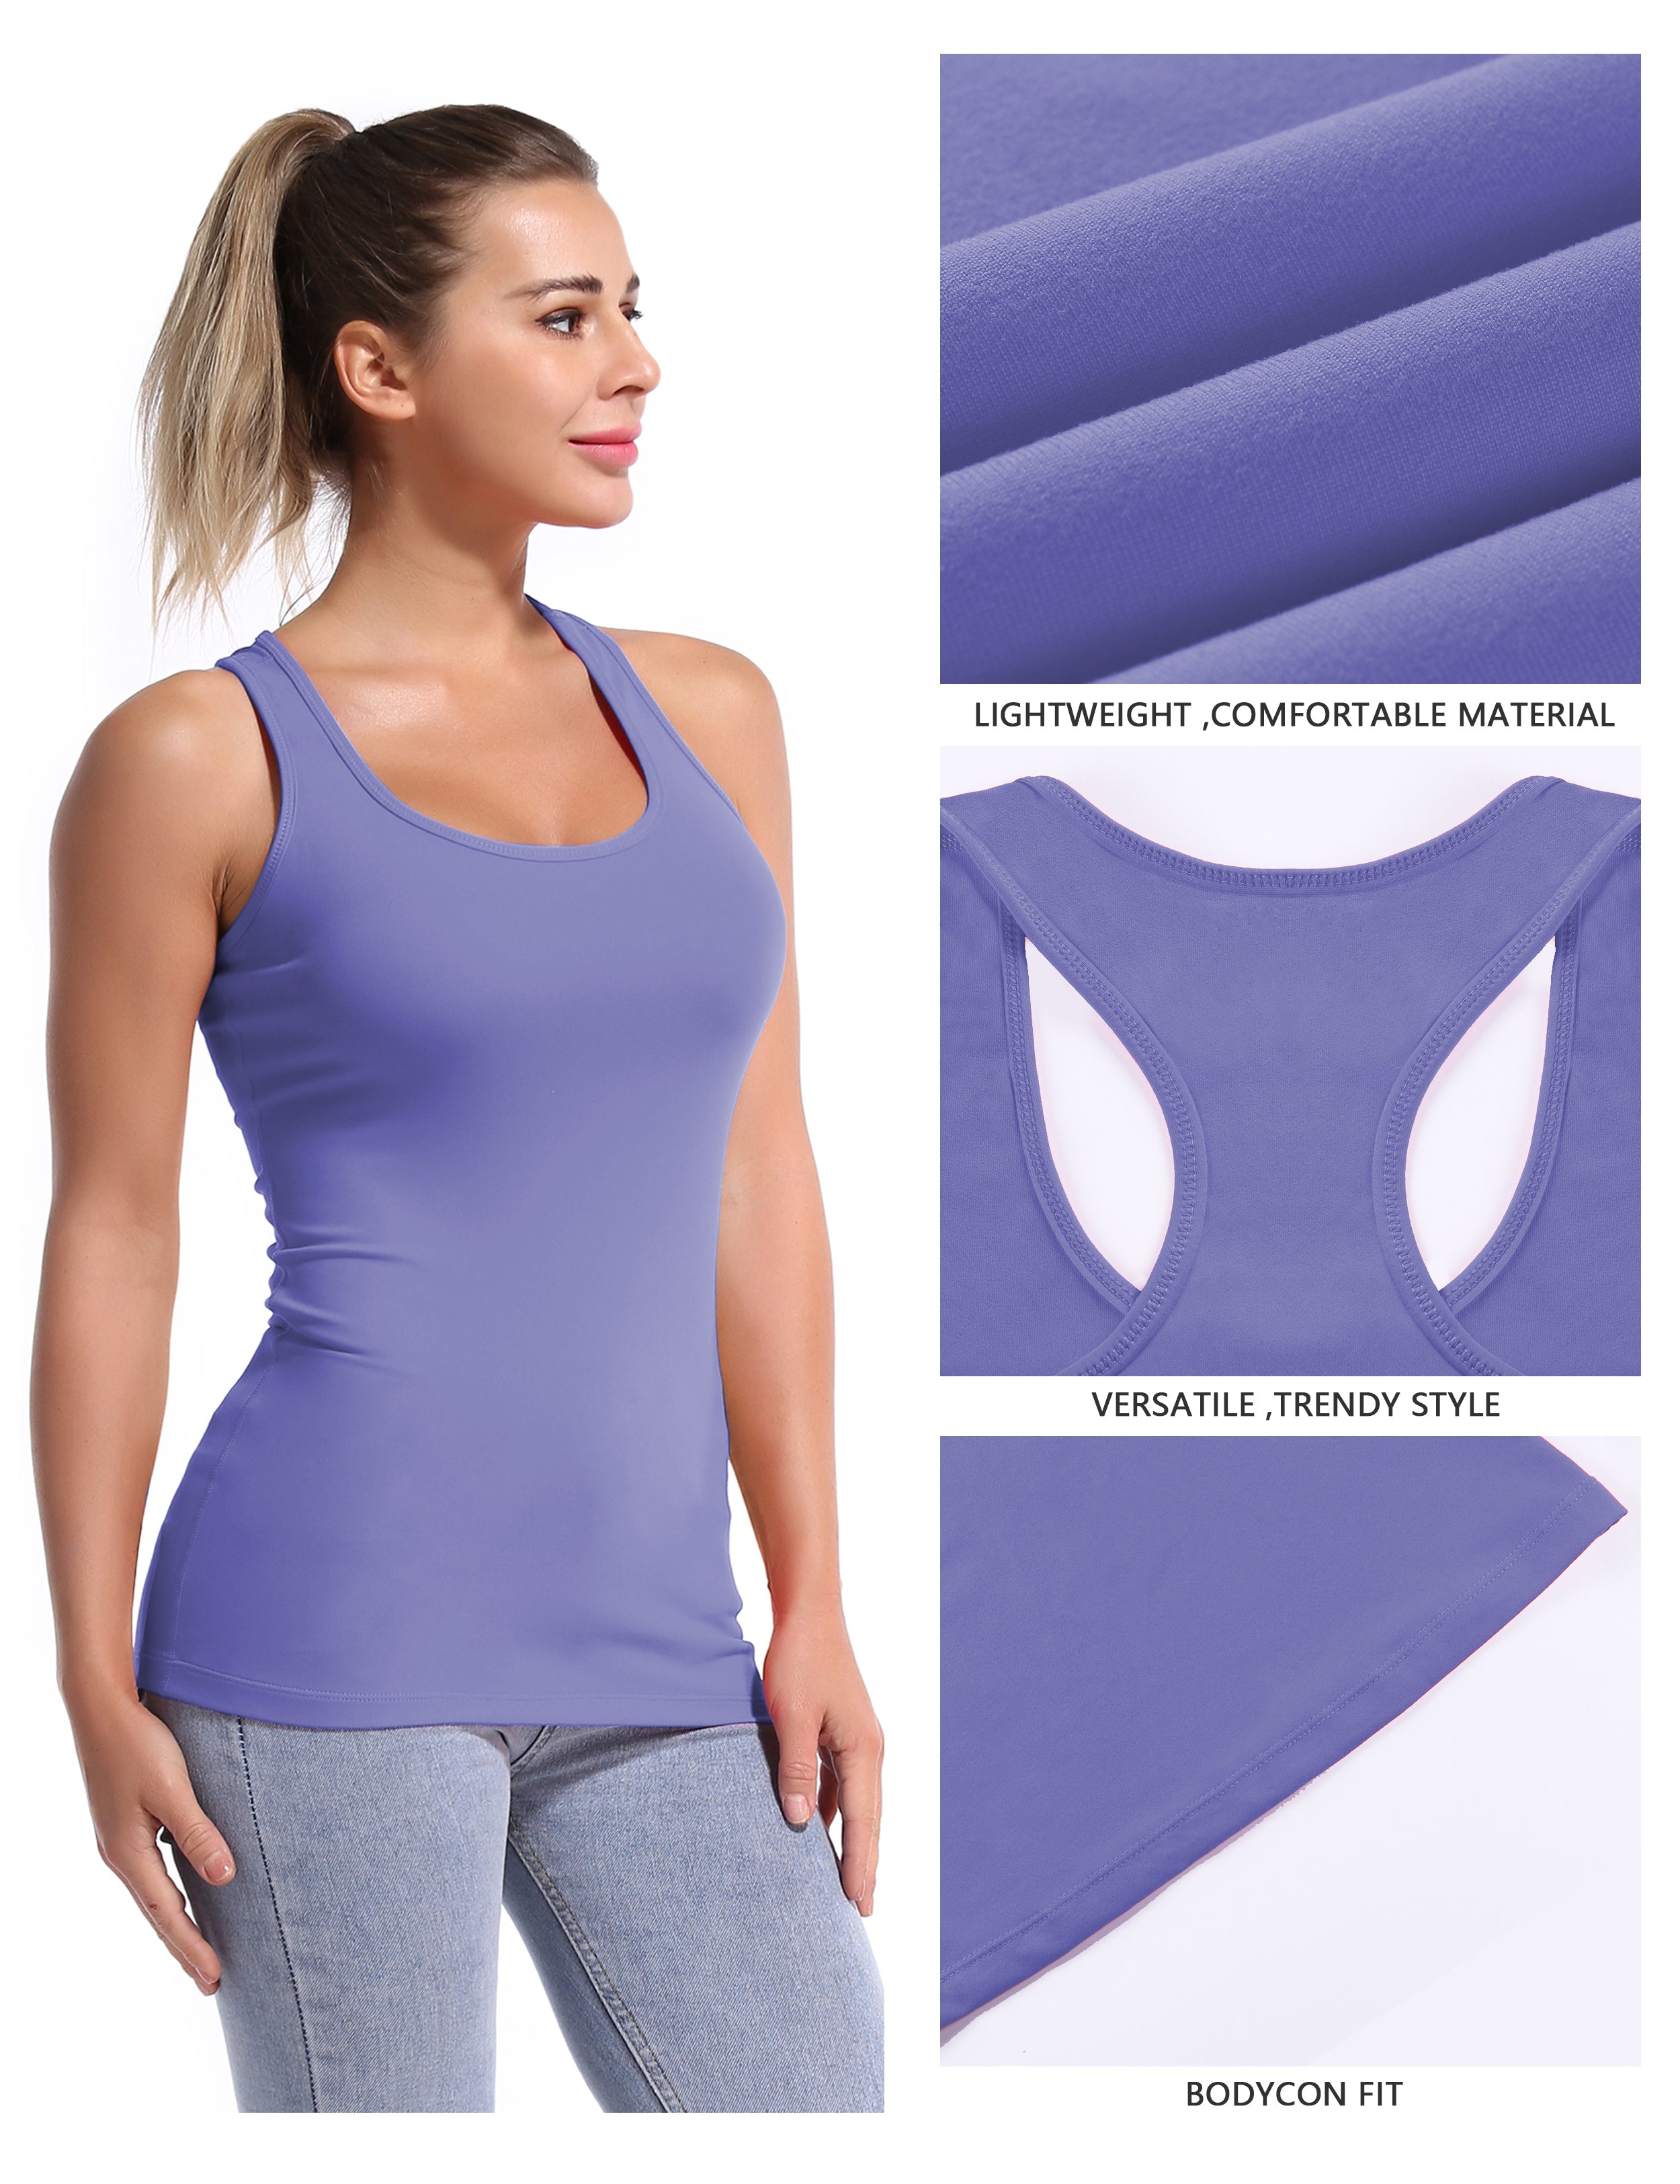 Racerback Athletic Tank Tops lavender 92%Nylon/8%Spandex(Cotton Soft) Designed for Golf Tight Fit So buttery soft, it feels weightless Sweat-wicking Four-way stretch Breathable Contours your body Sits below the waistband for moderate, everyday coverage